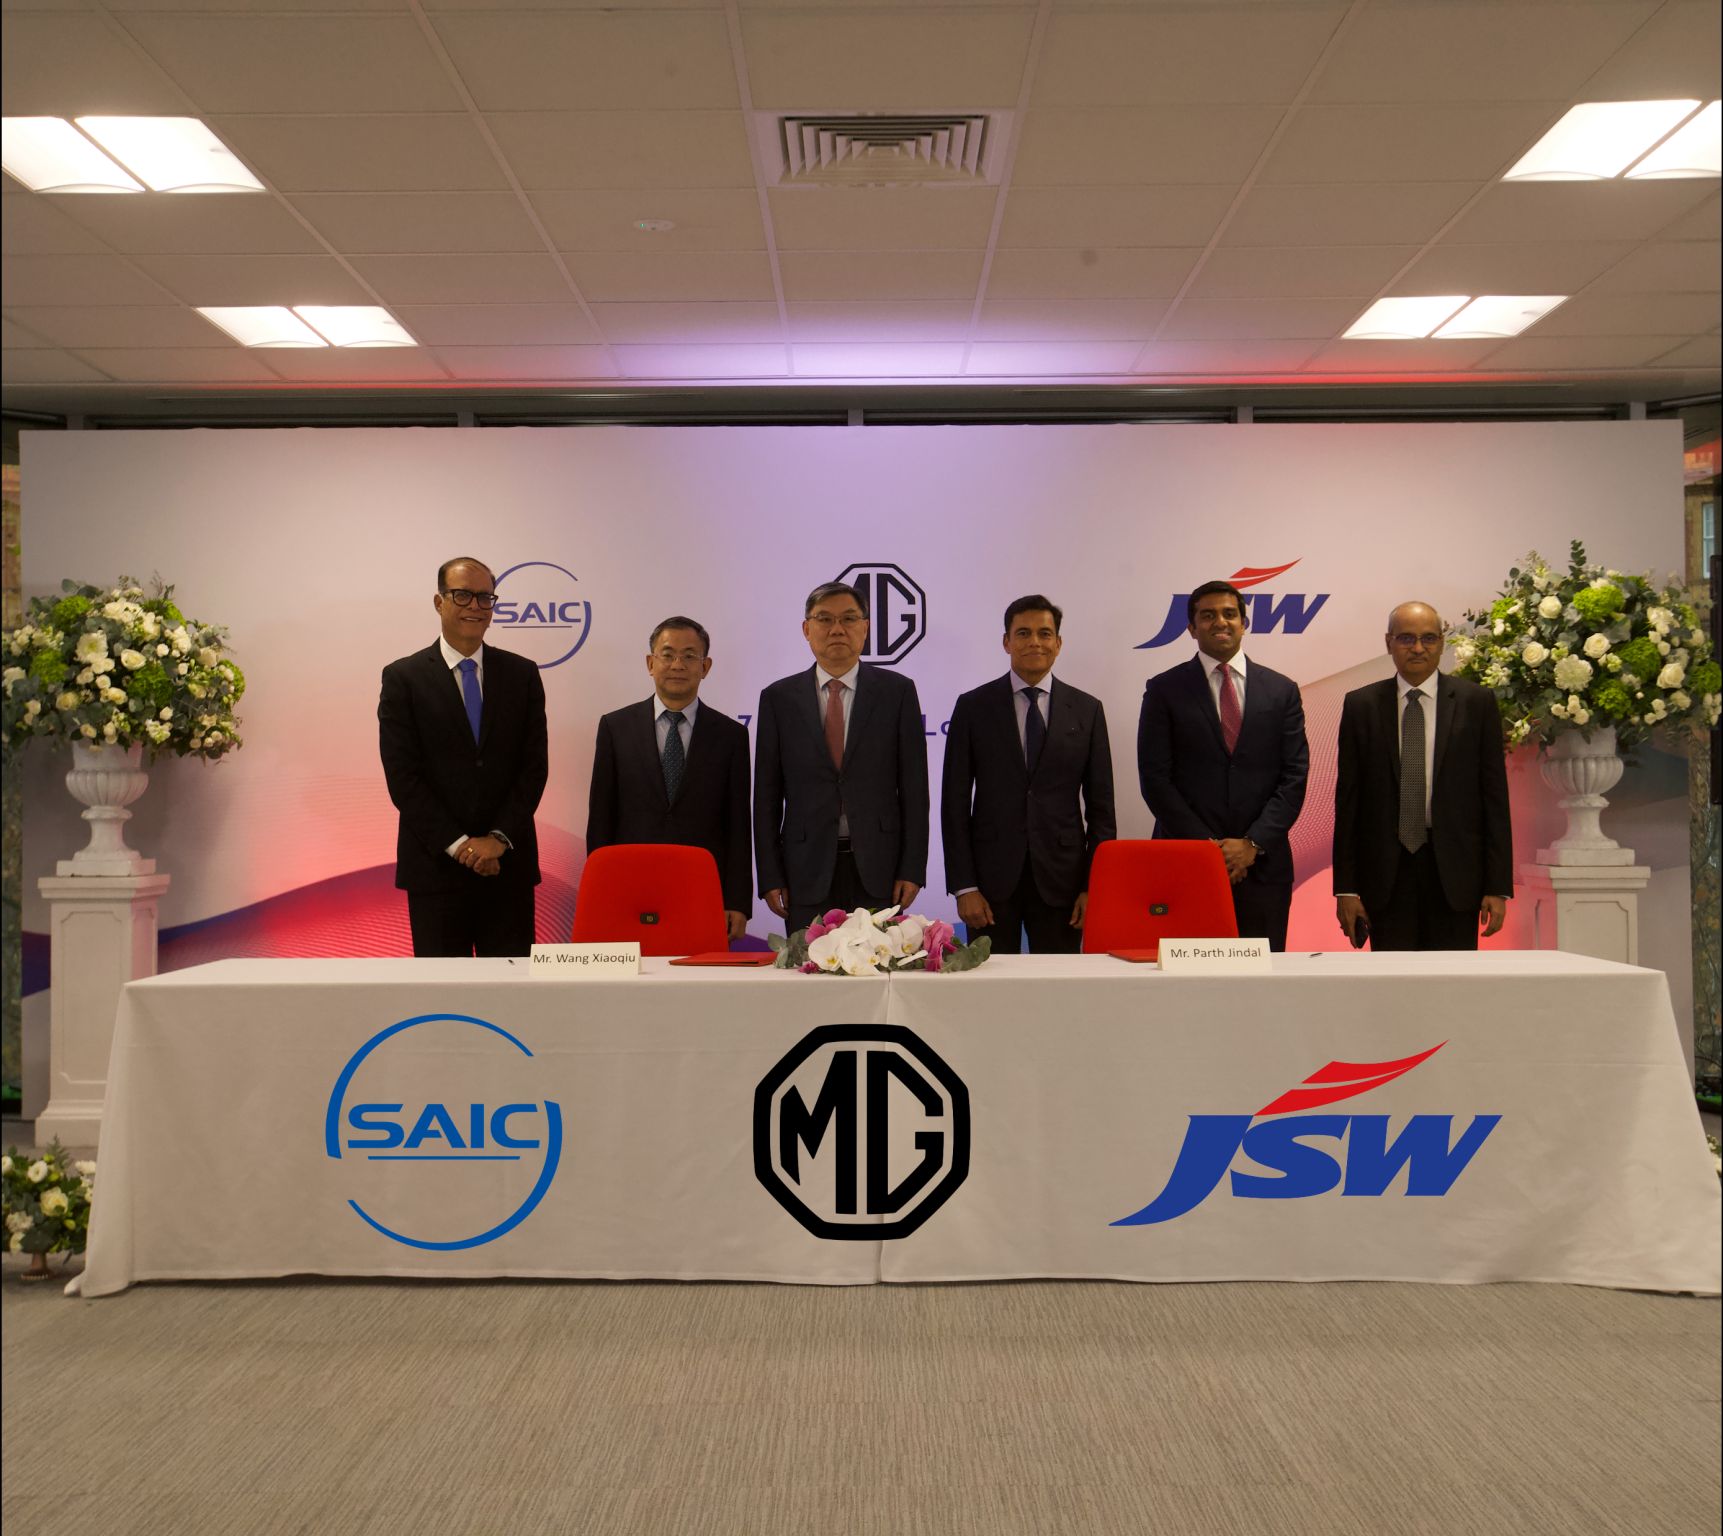 It’s Official! Morris Garages India welcomes JSW Group as its new JV partner | World Auto Forum